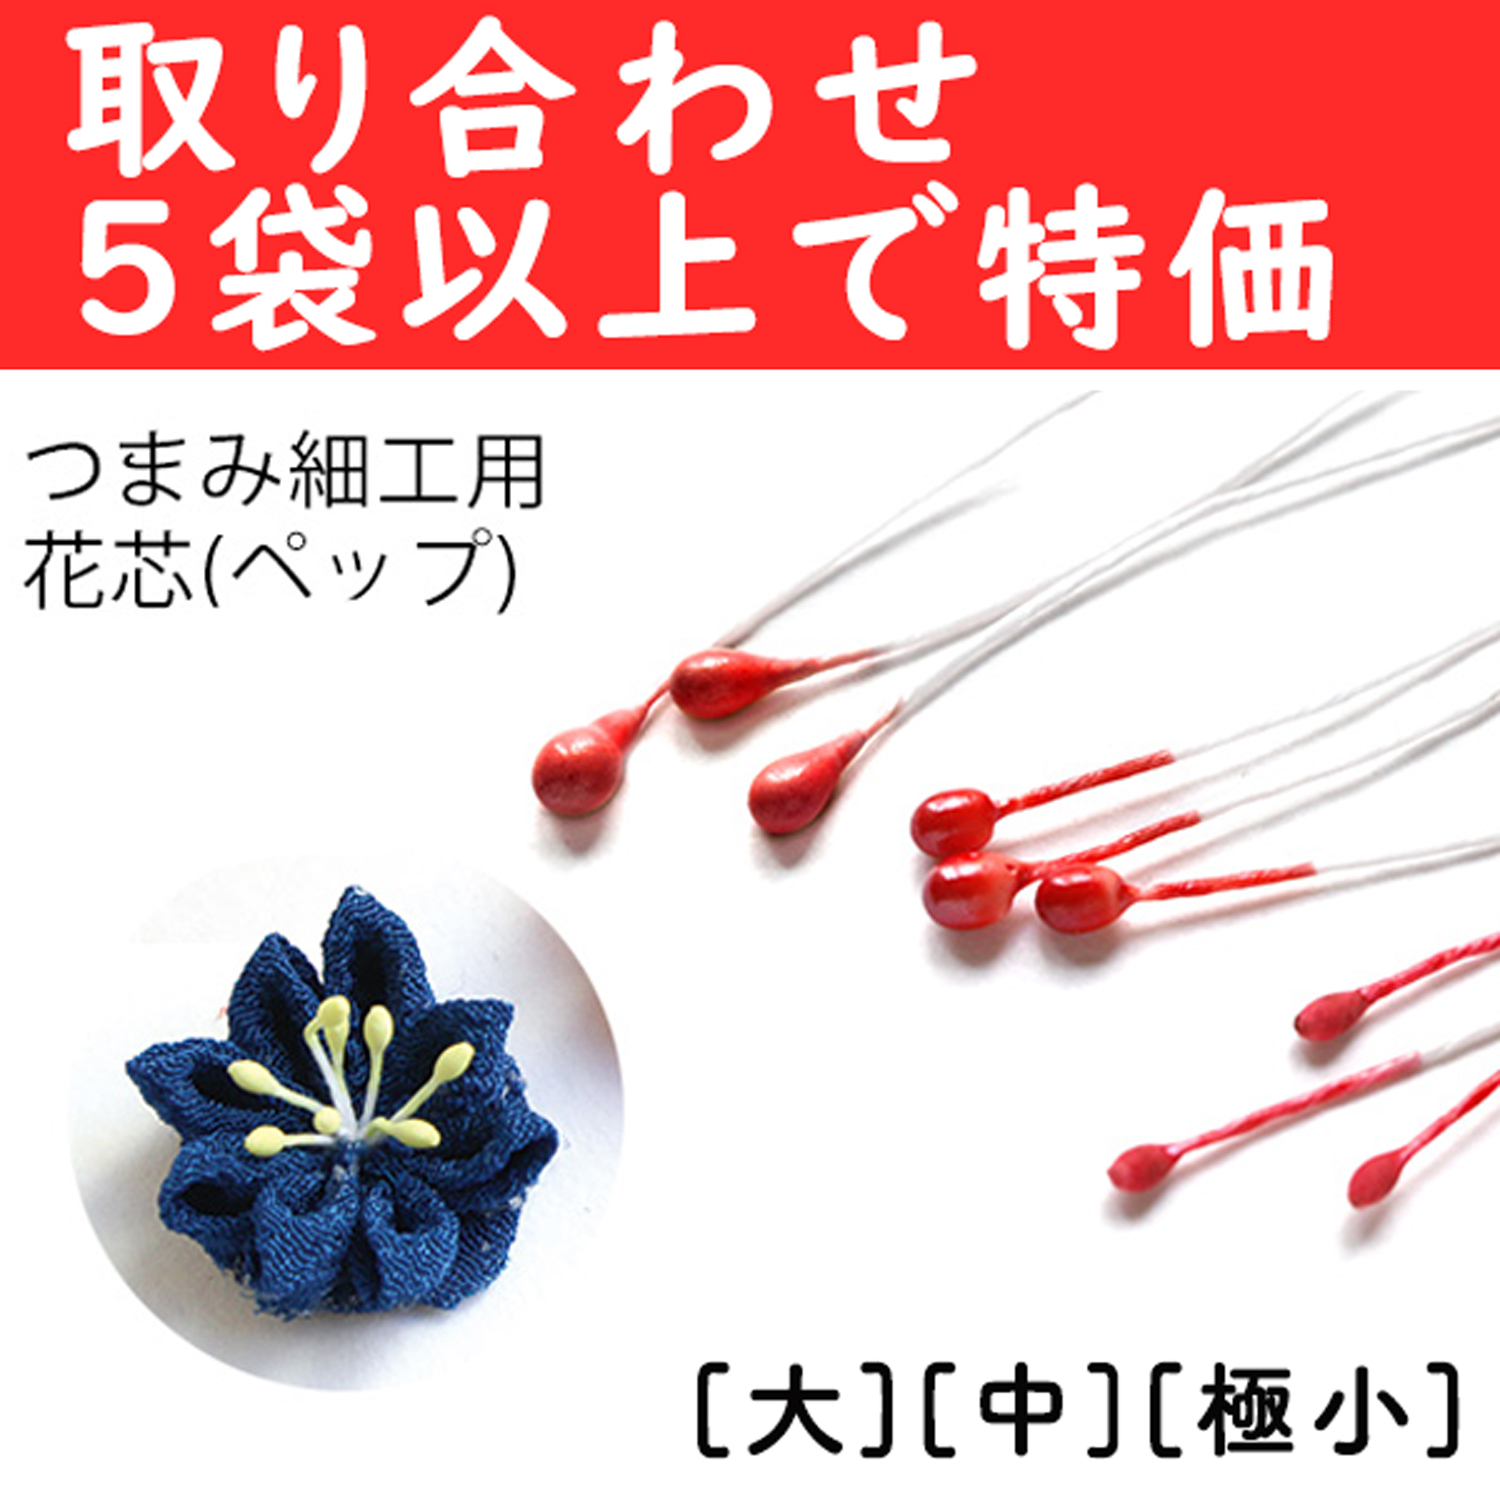 S54-OVER5 つまみ細工用花芯 ペップ 極小 φ1mm/中 φ1.5mm/大 φ2mm 取り合わせ5袋以上で特価 (袋)